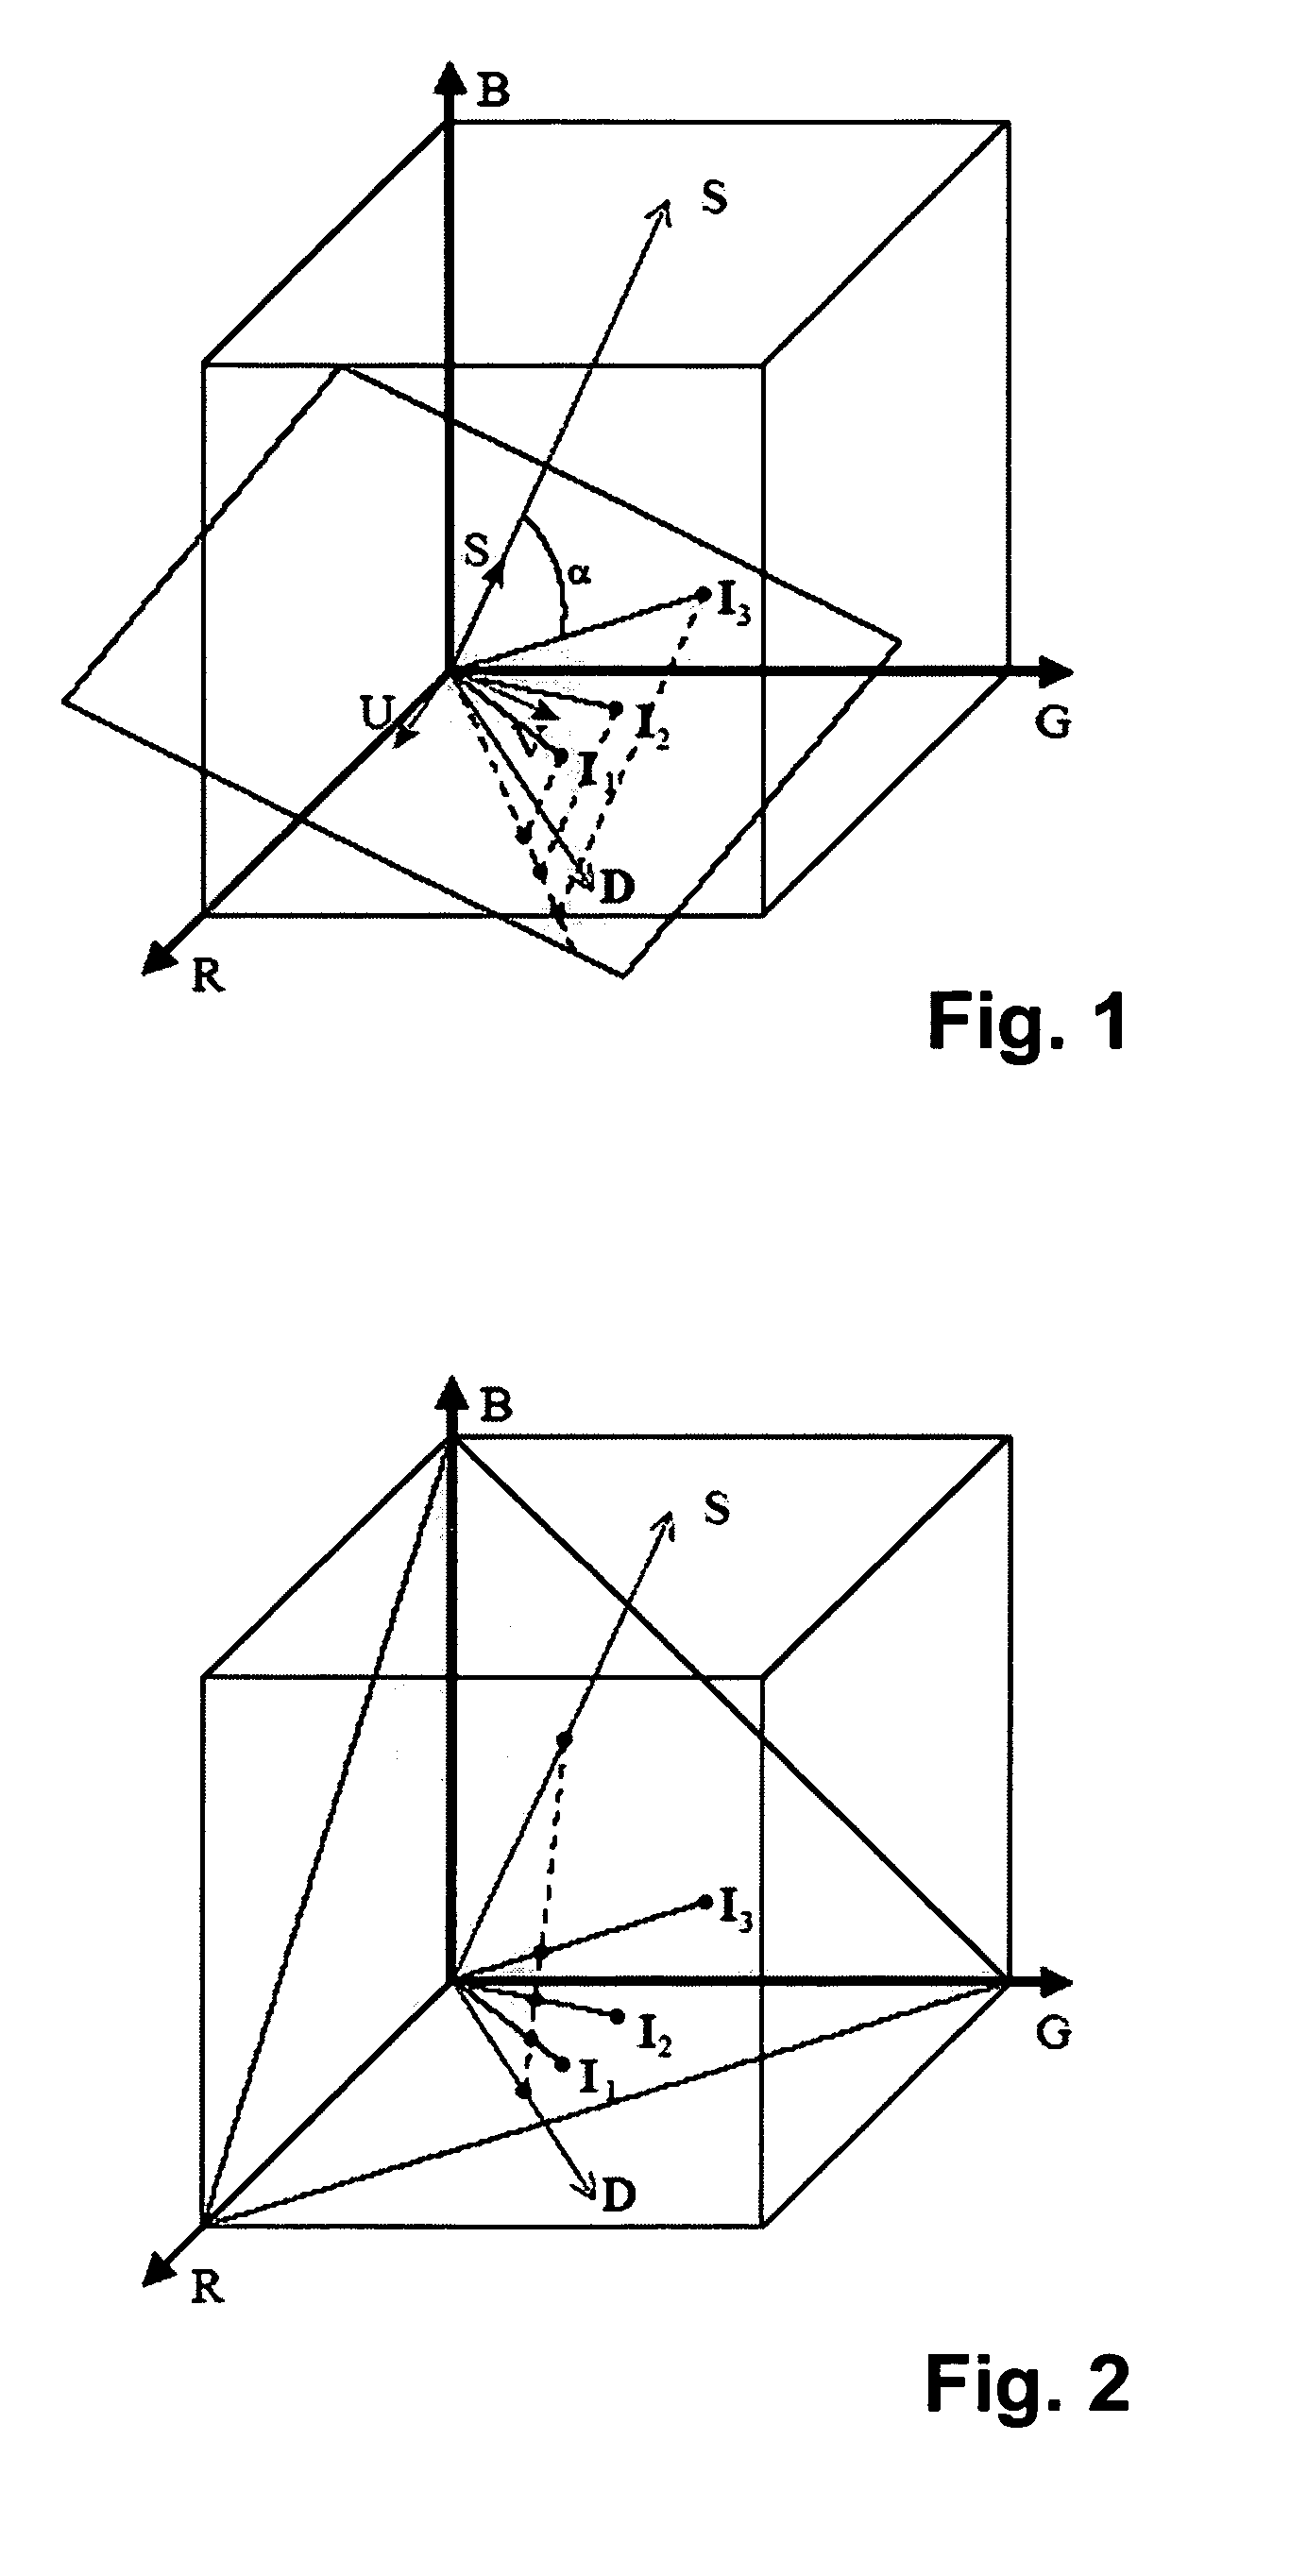 Methods for identifying, separating and editing reflection components in multi-channel images and videos